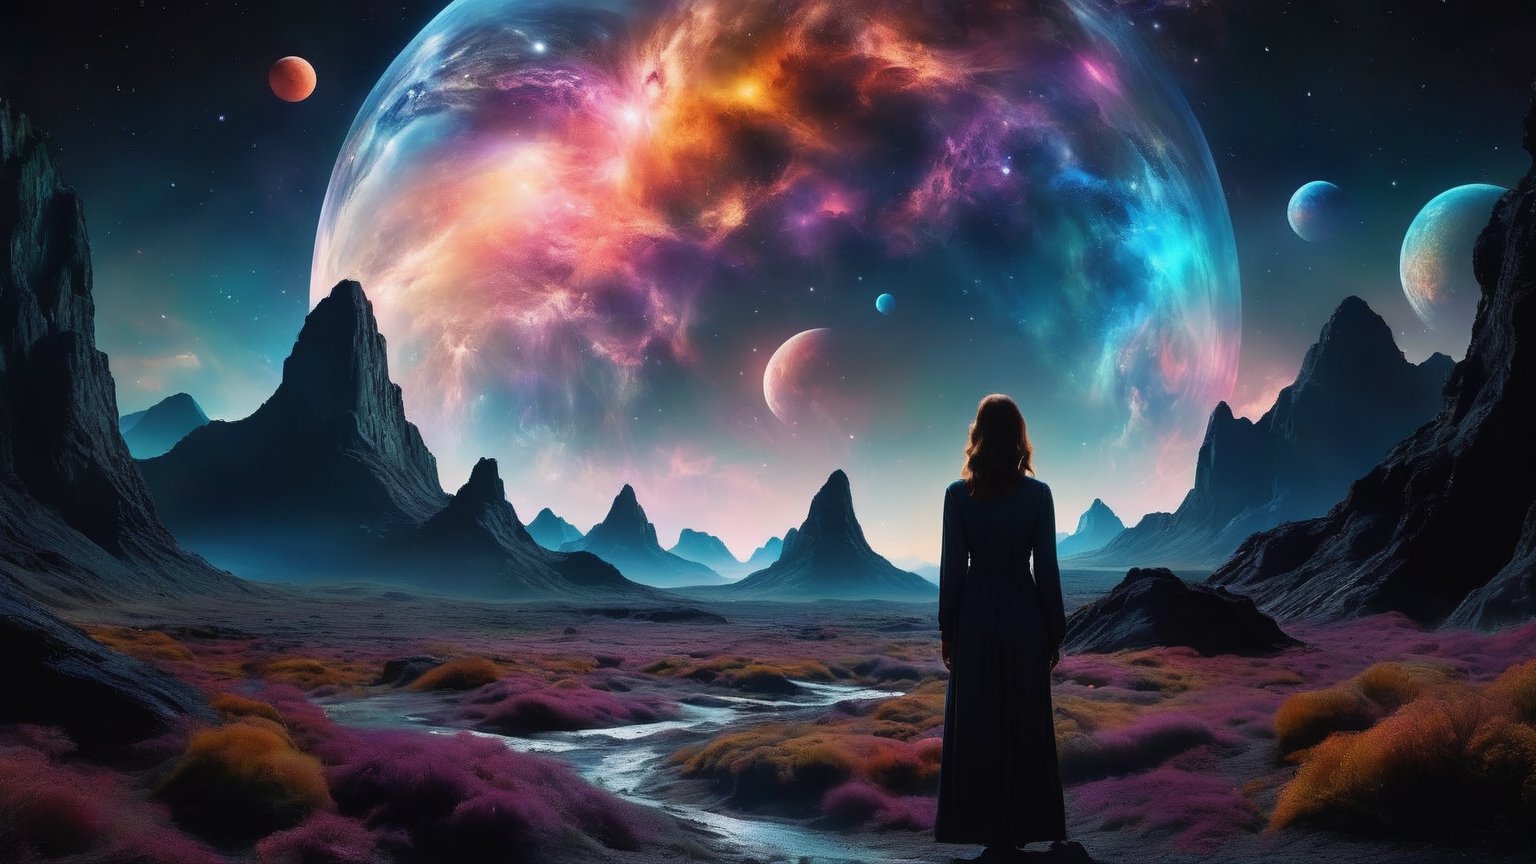 make me some abstract landscapes with a woman in astral profection
dark mode,wide background.,Movie Still,photo r3al